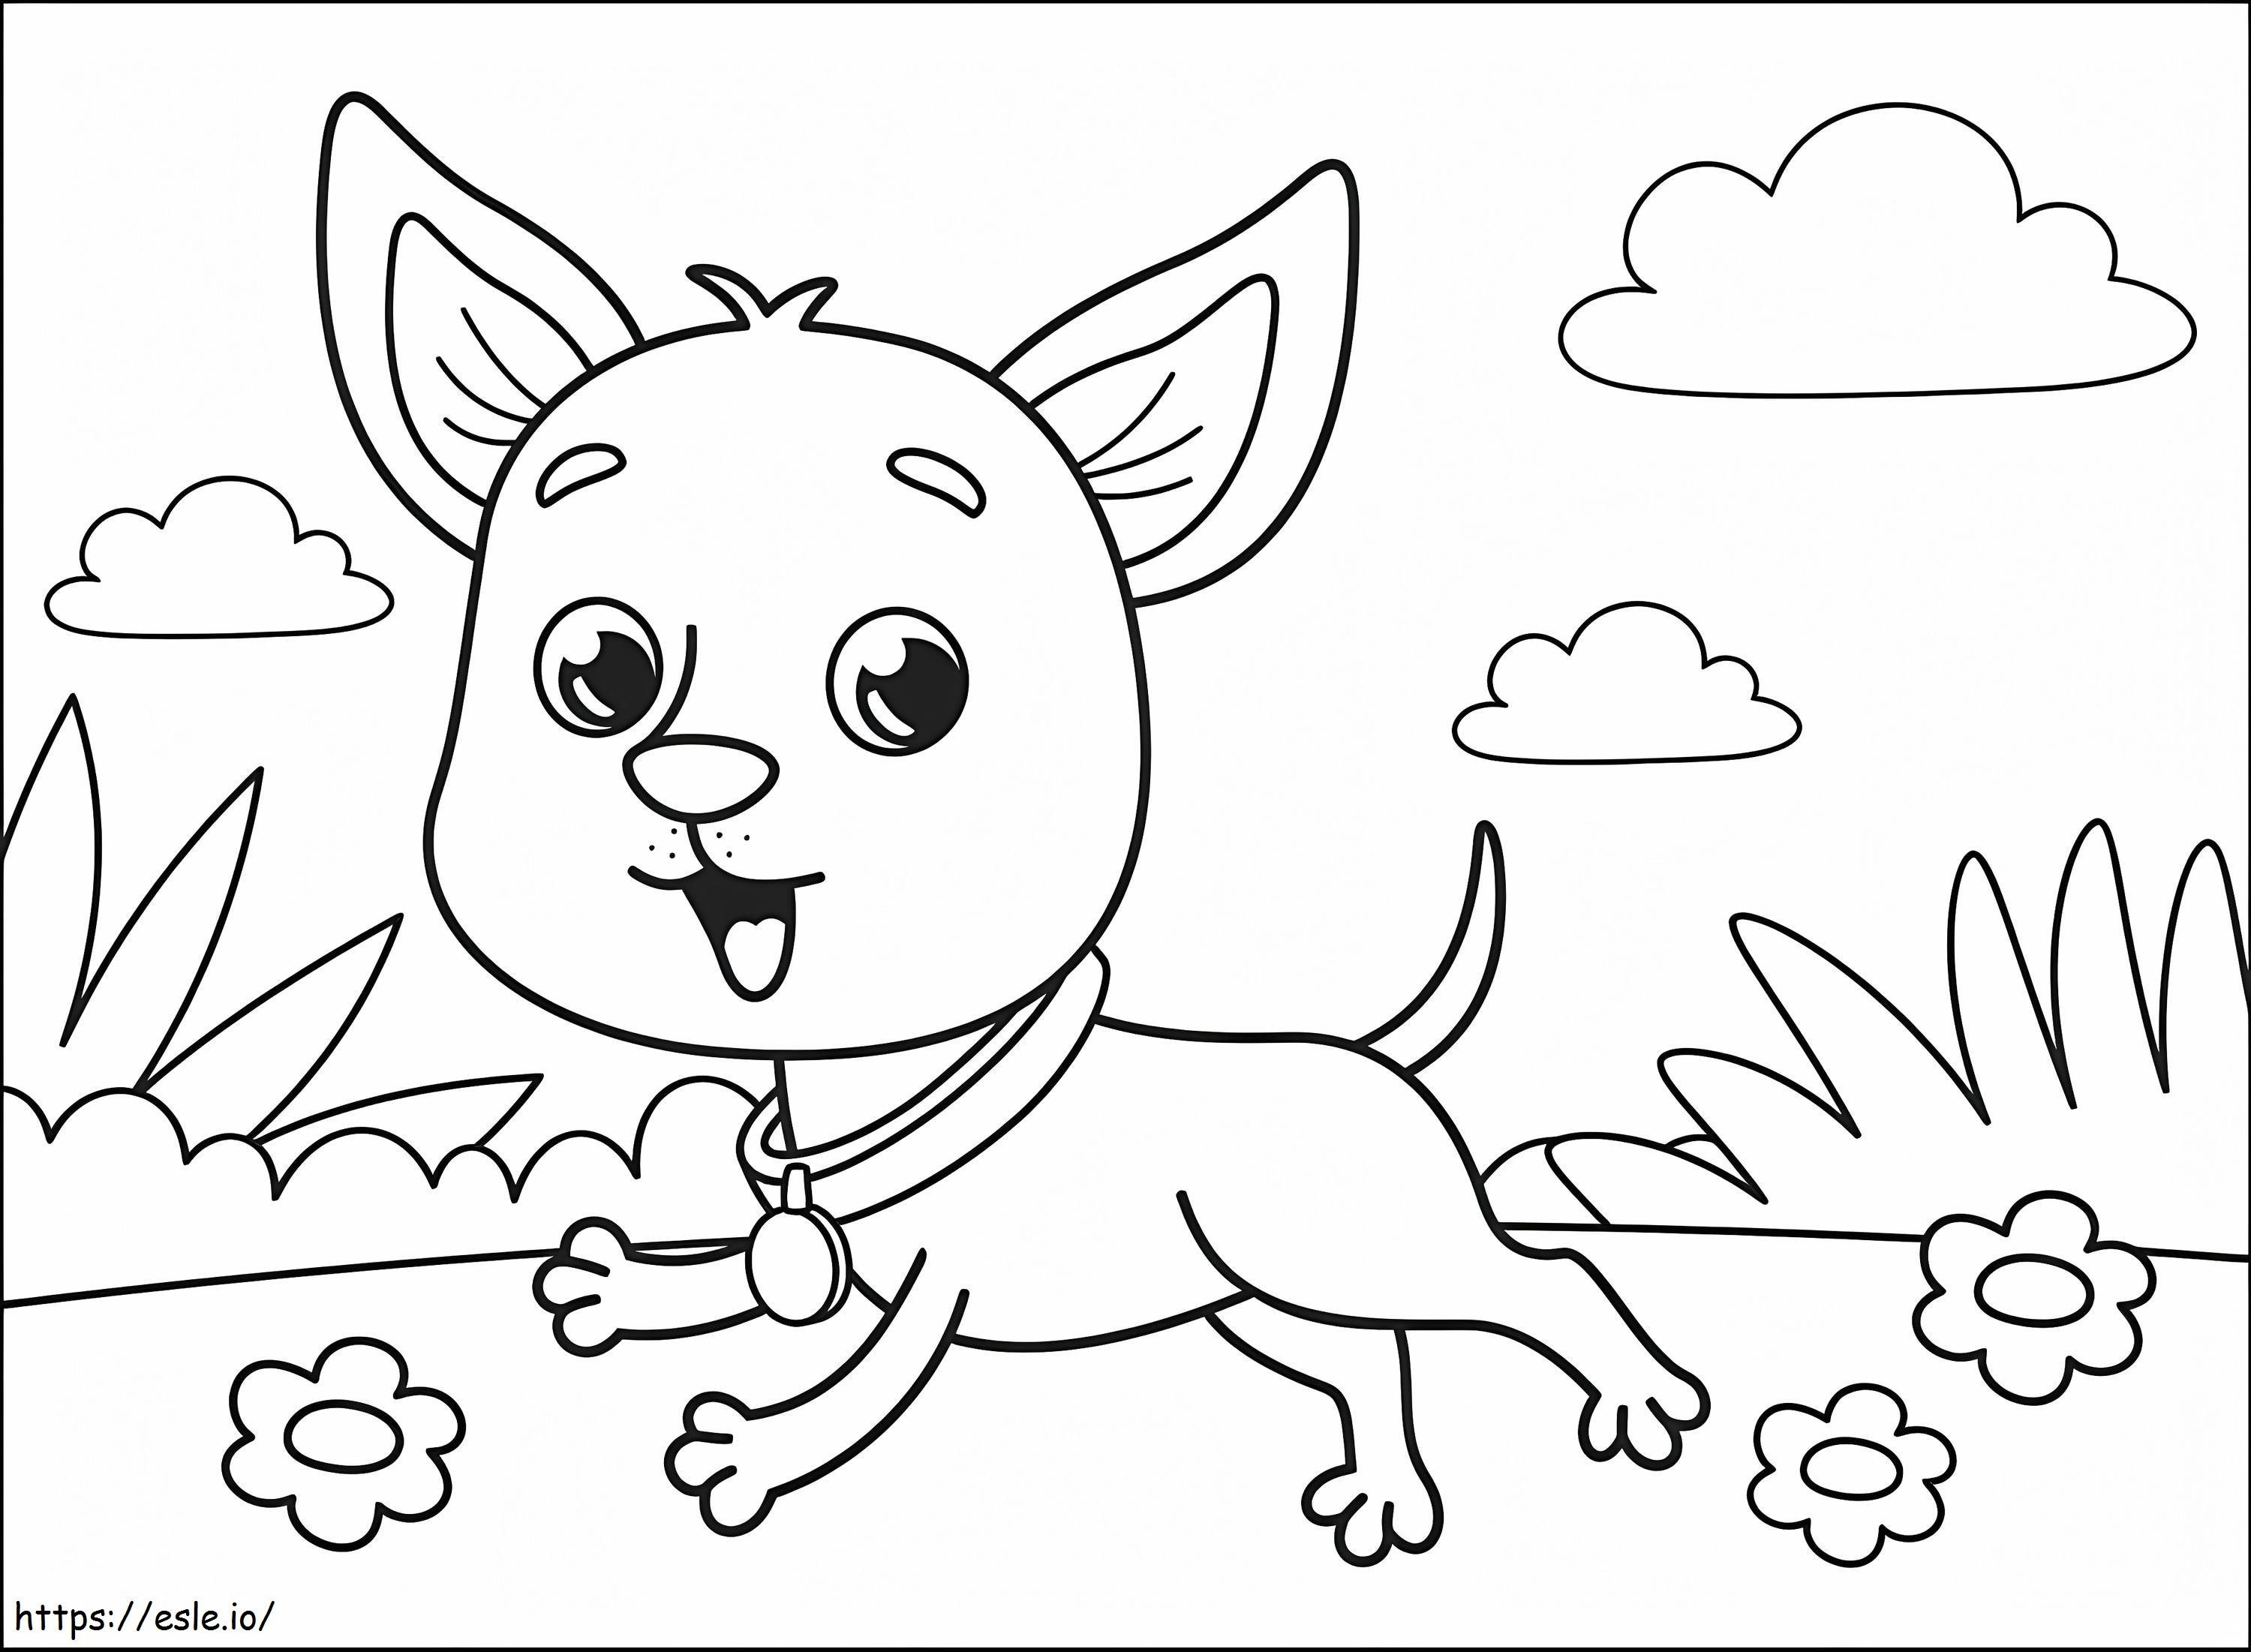 Cute Chihuahua Running coloring page